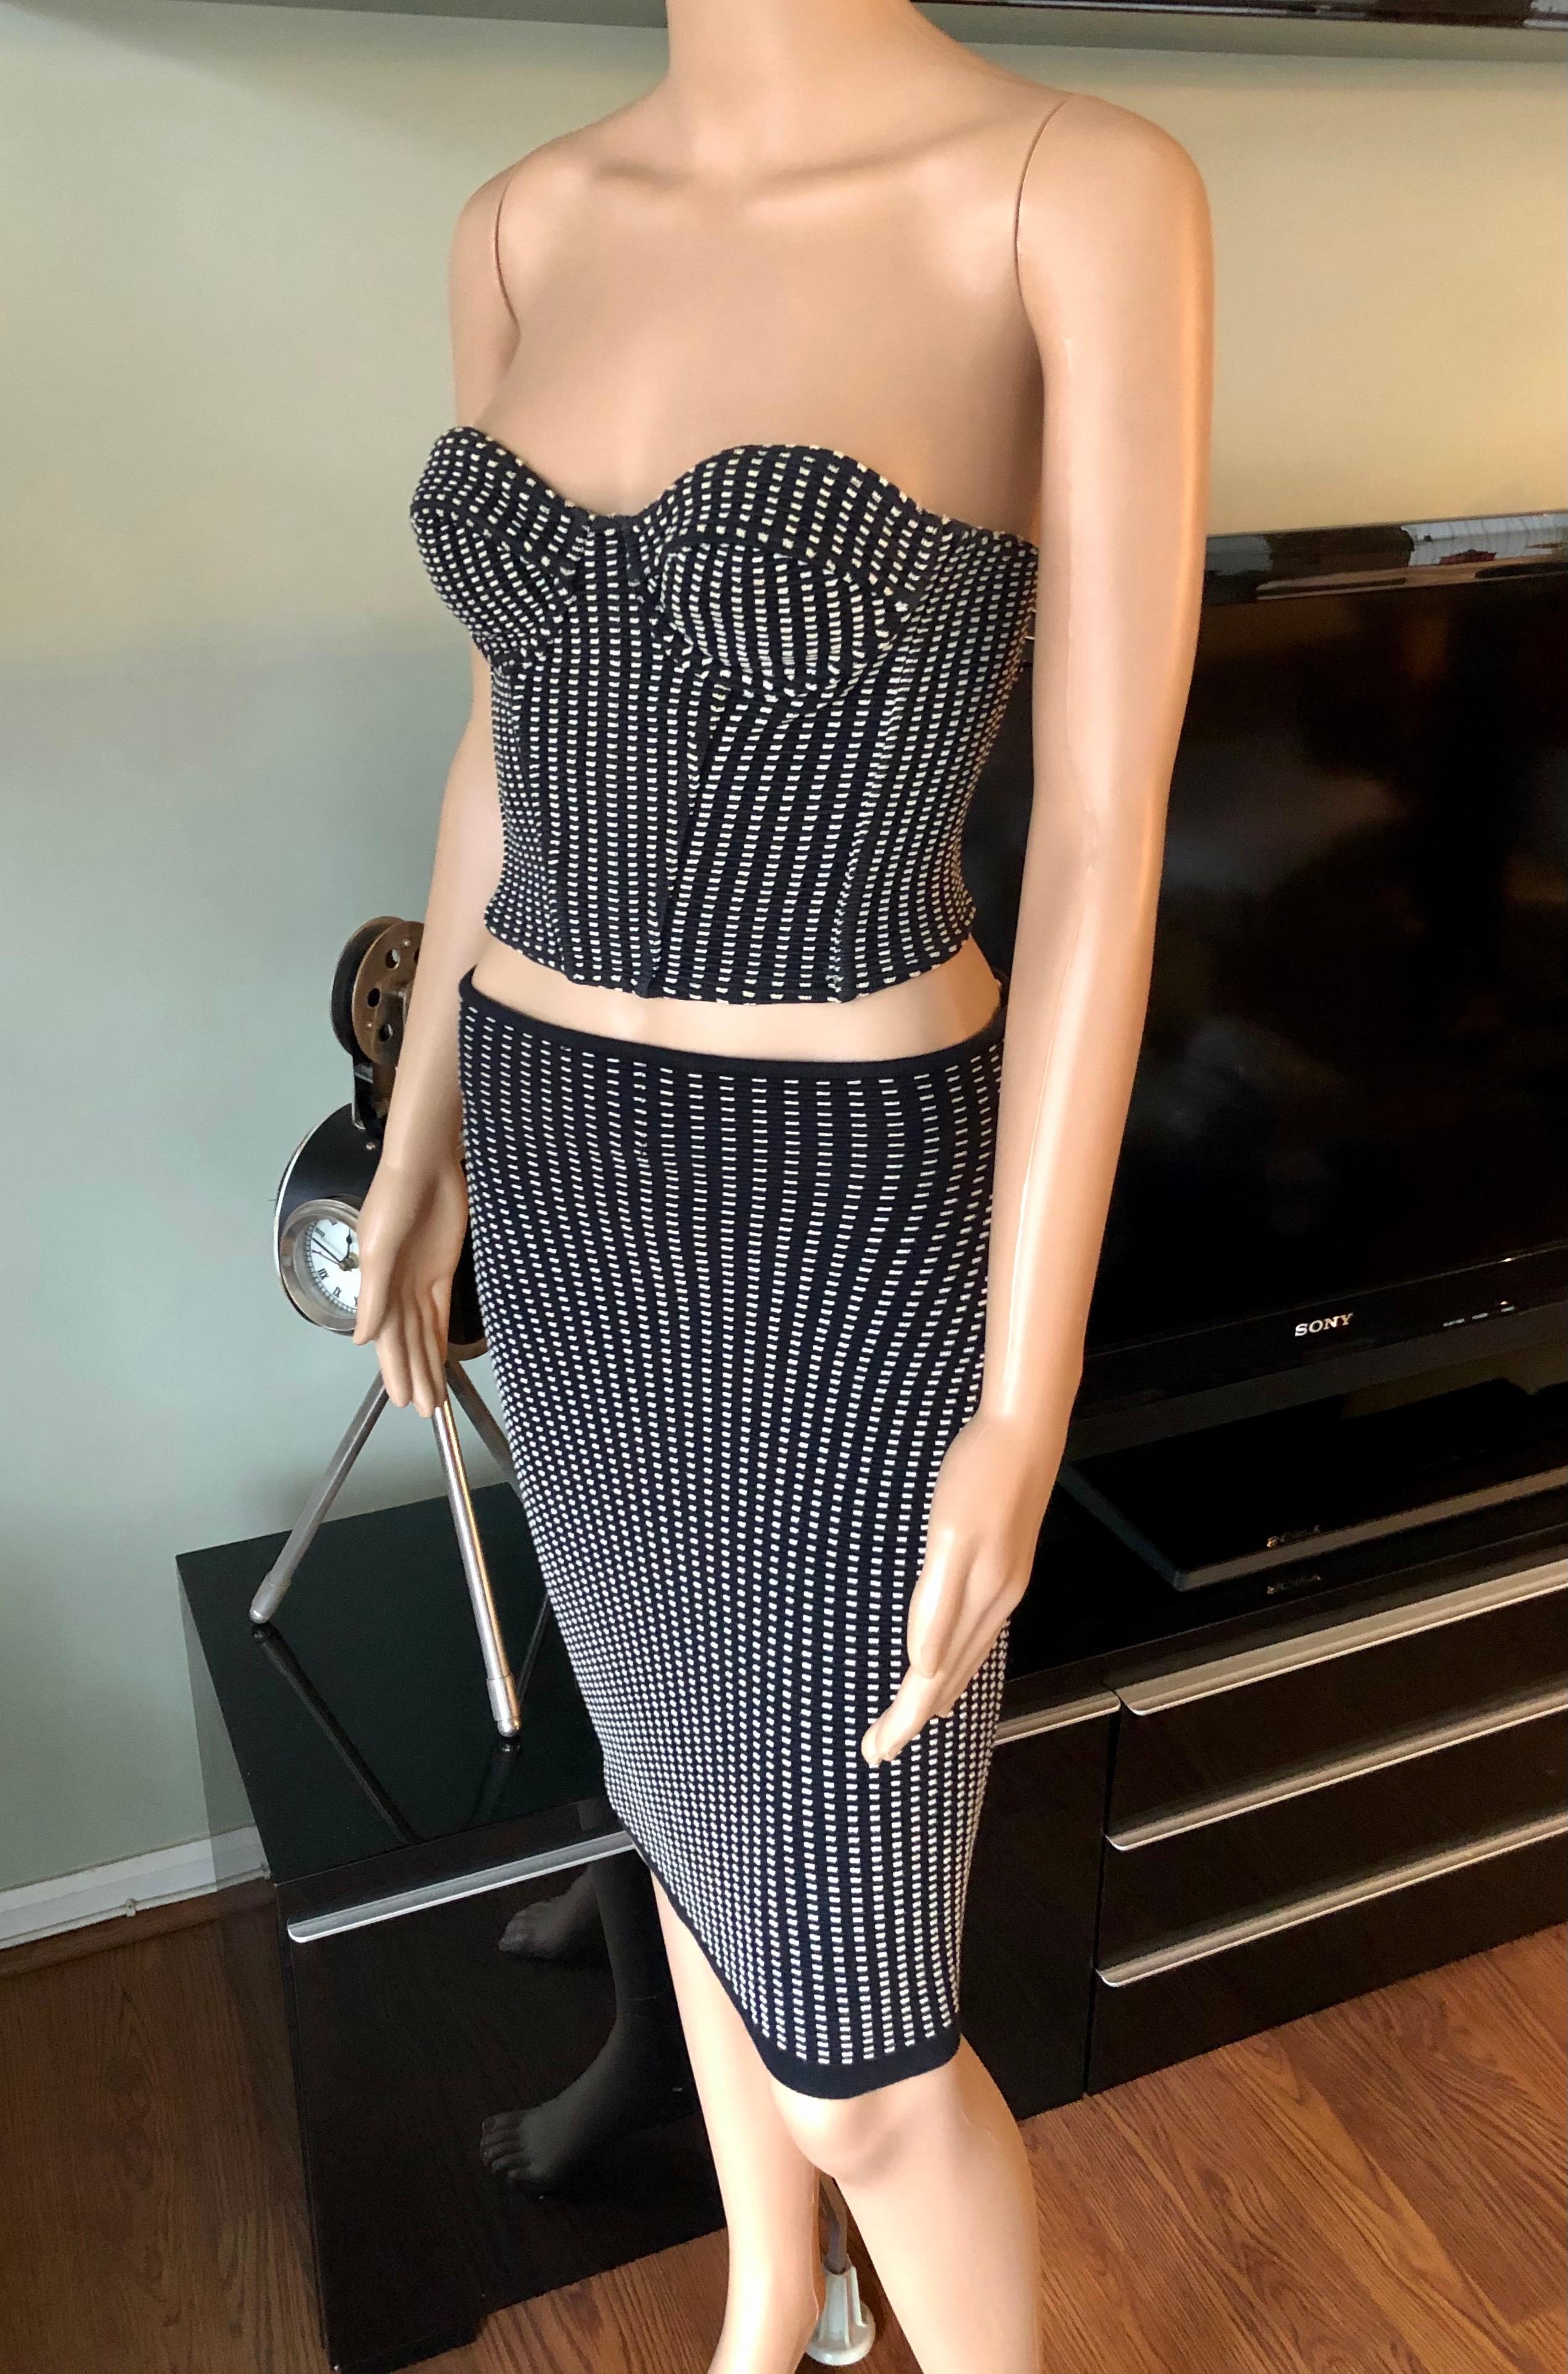 Azzedine Alaia F/W 1991 Vintage Skirt and Bustier Crop Top 2 Piece Set Size S/XS

Please note the top is size XS and the skirt is size S.
